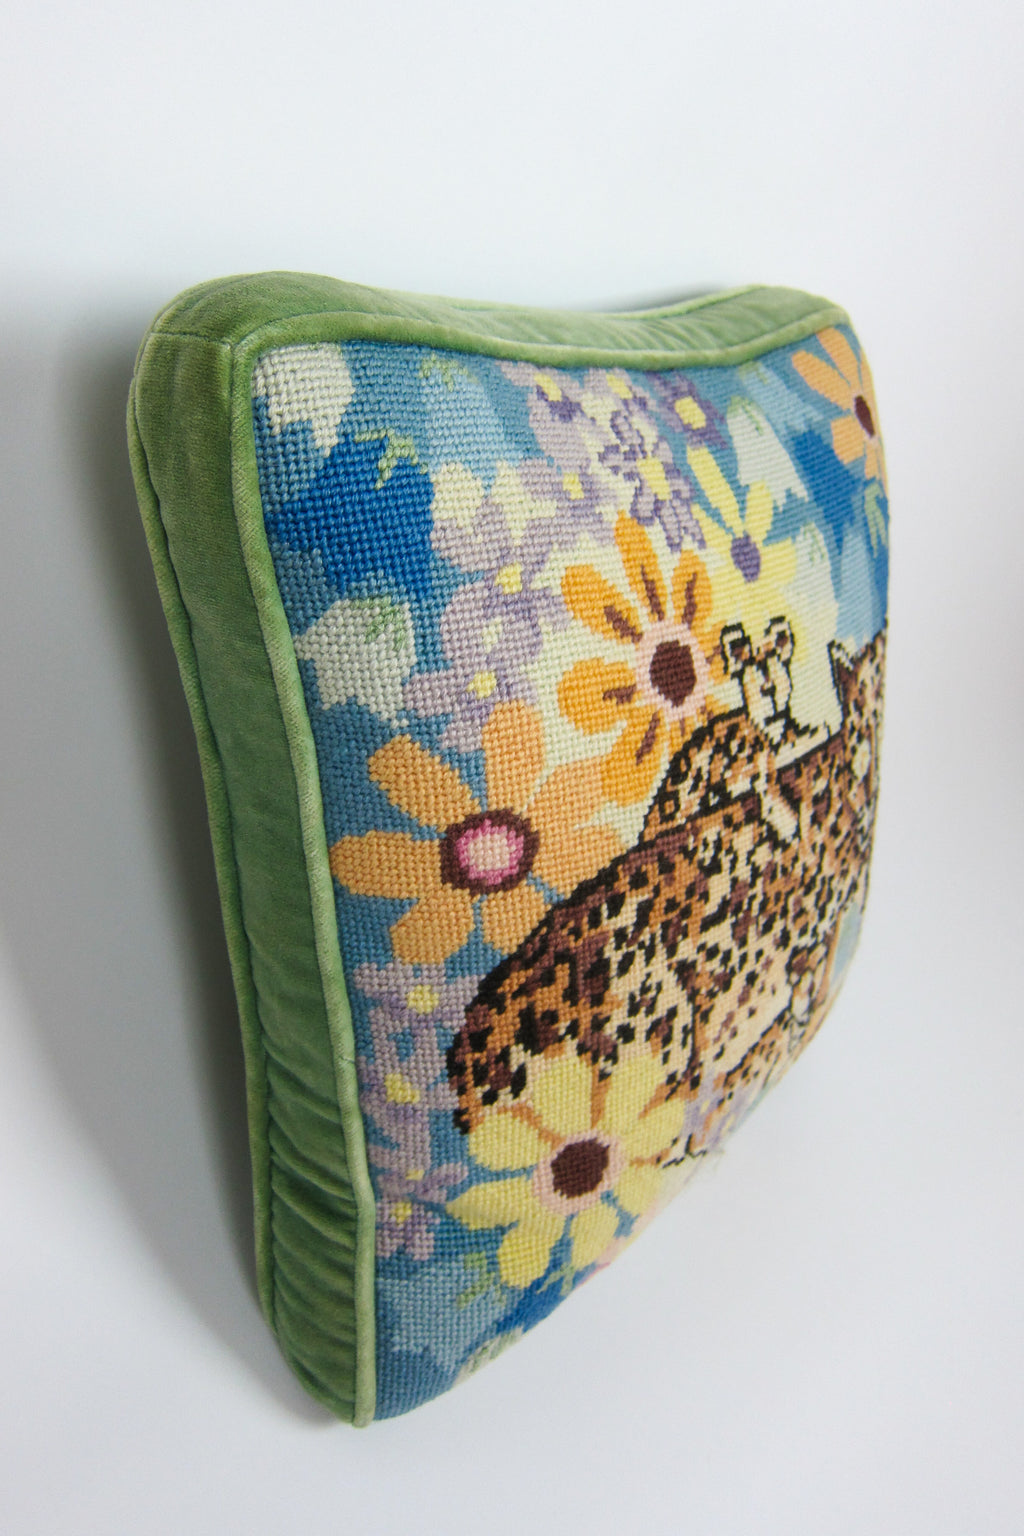 Vintage 1970s Psychedelic Leopard Needlepoint Pillow